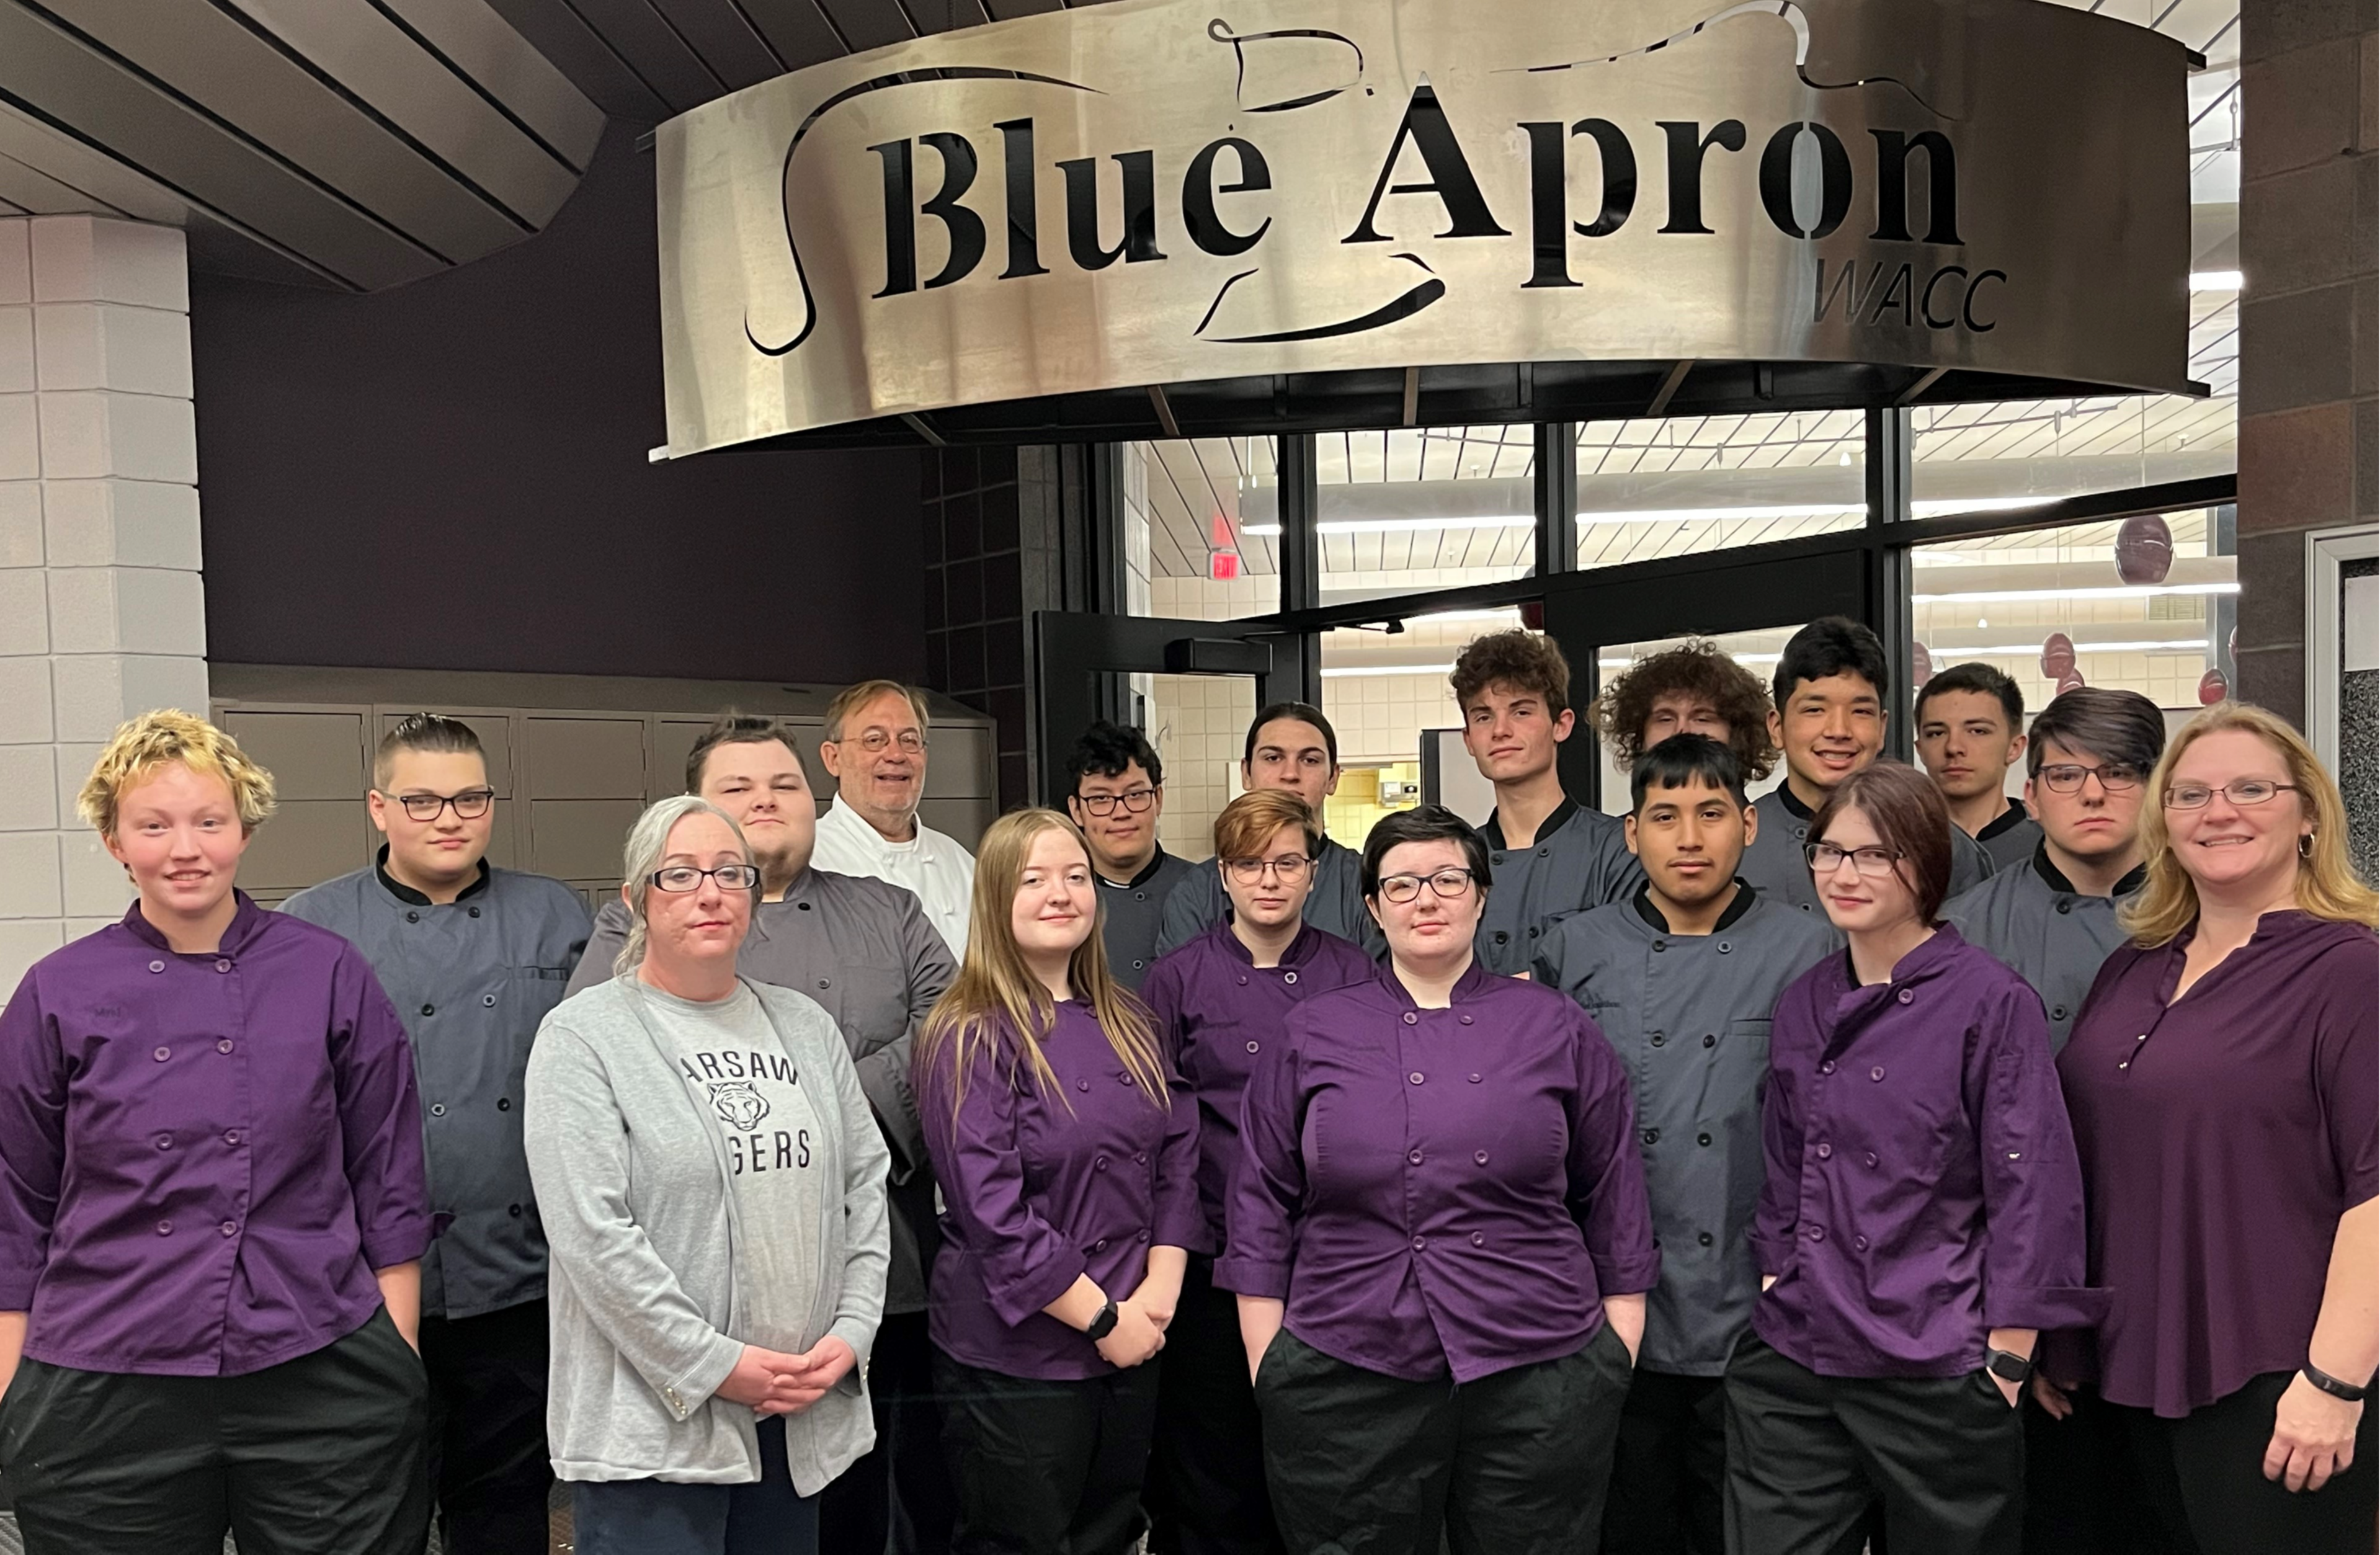 ADVANCED CULINARY ARTS students pose at the entrance to the blue apron